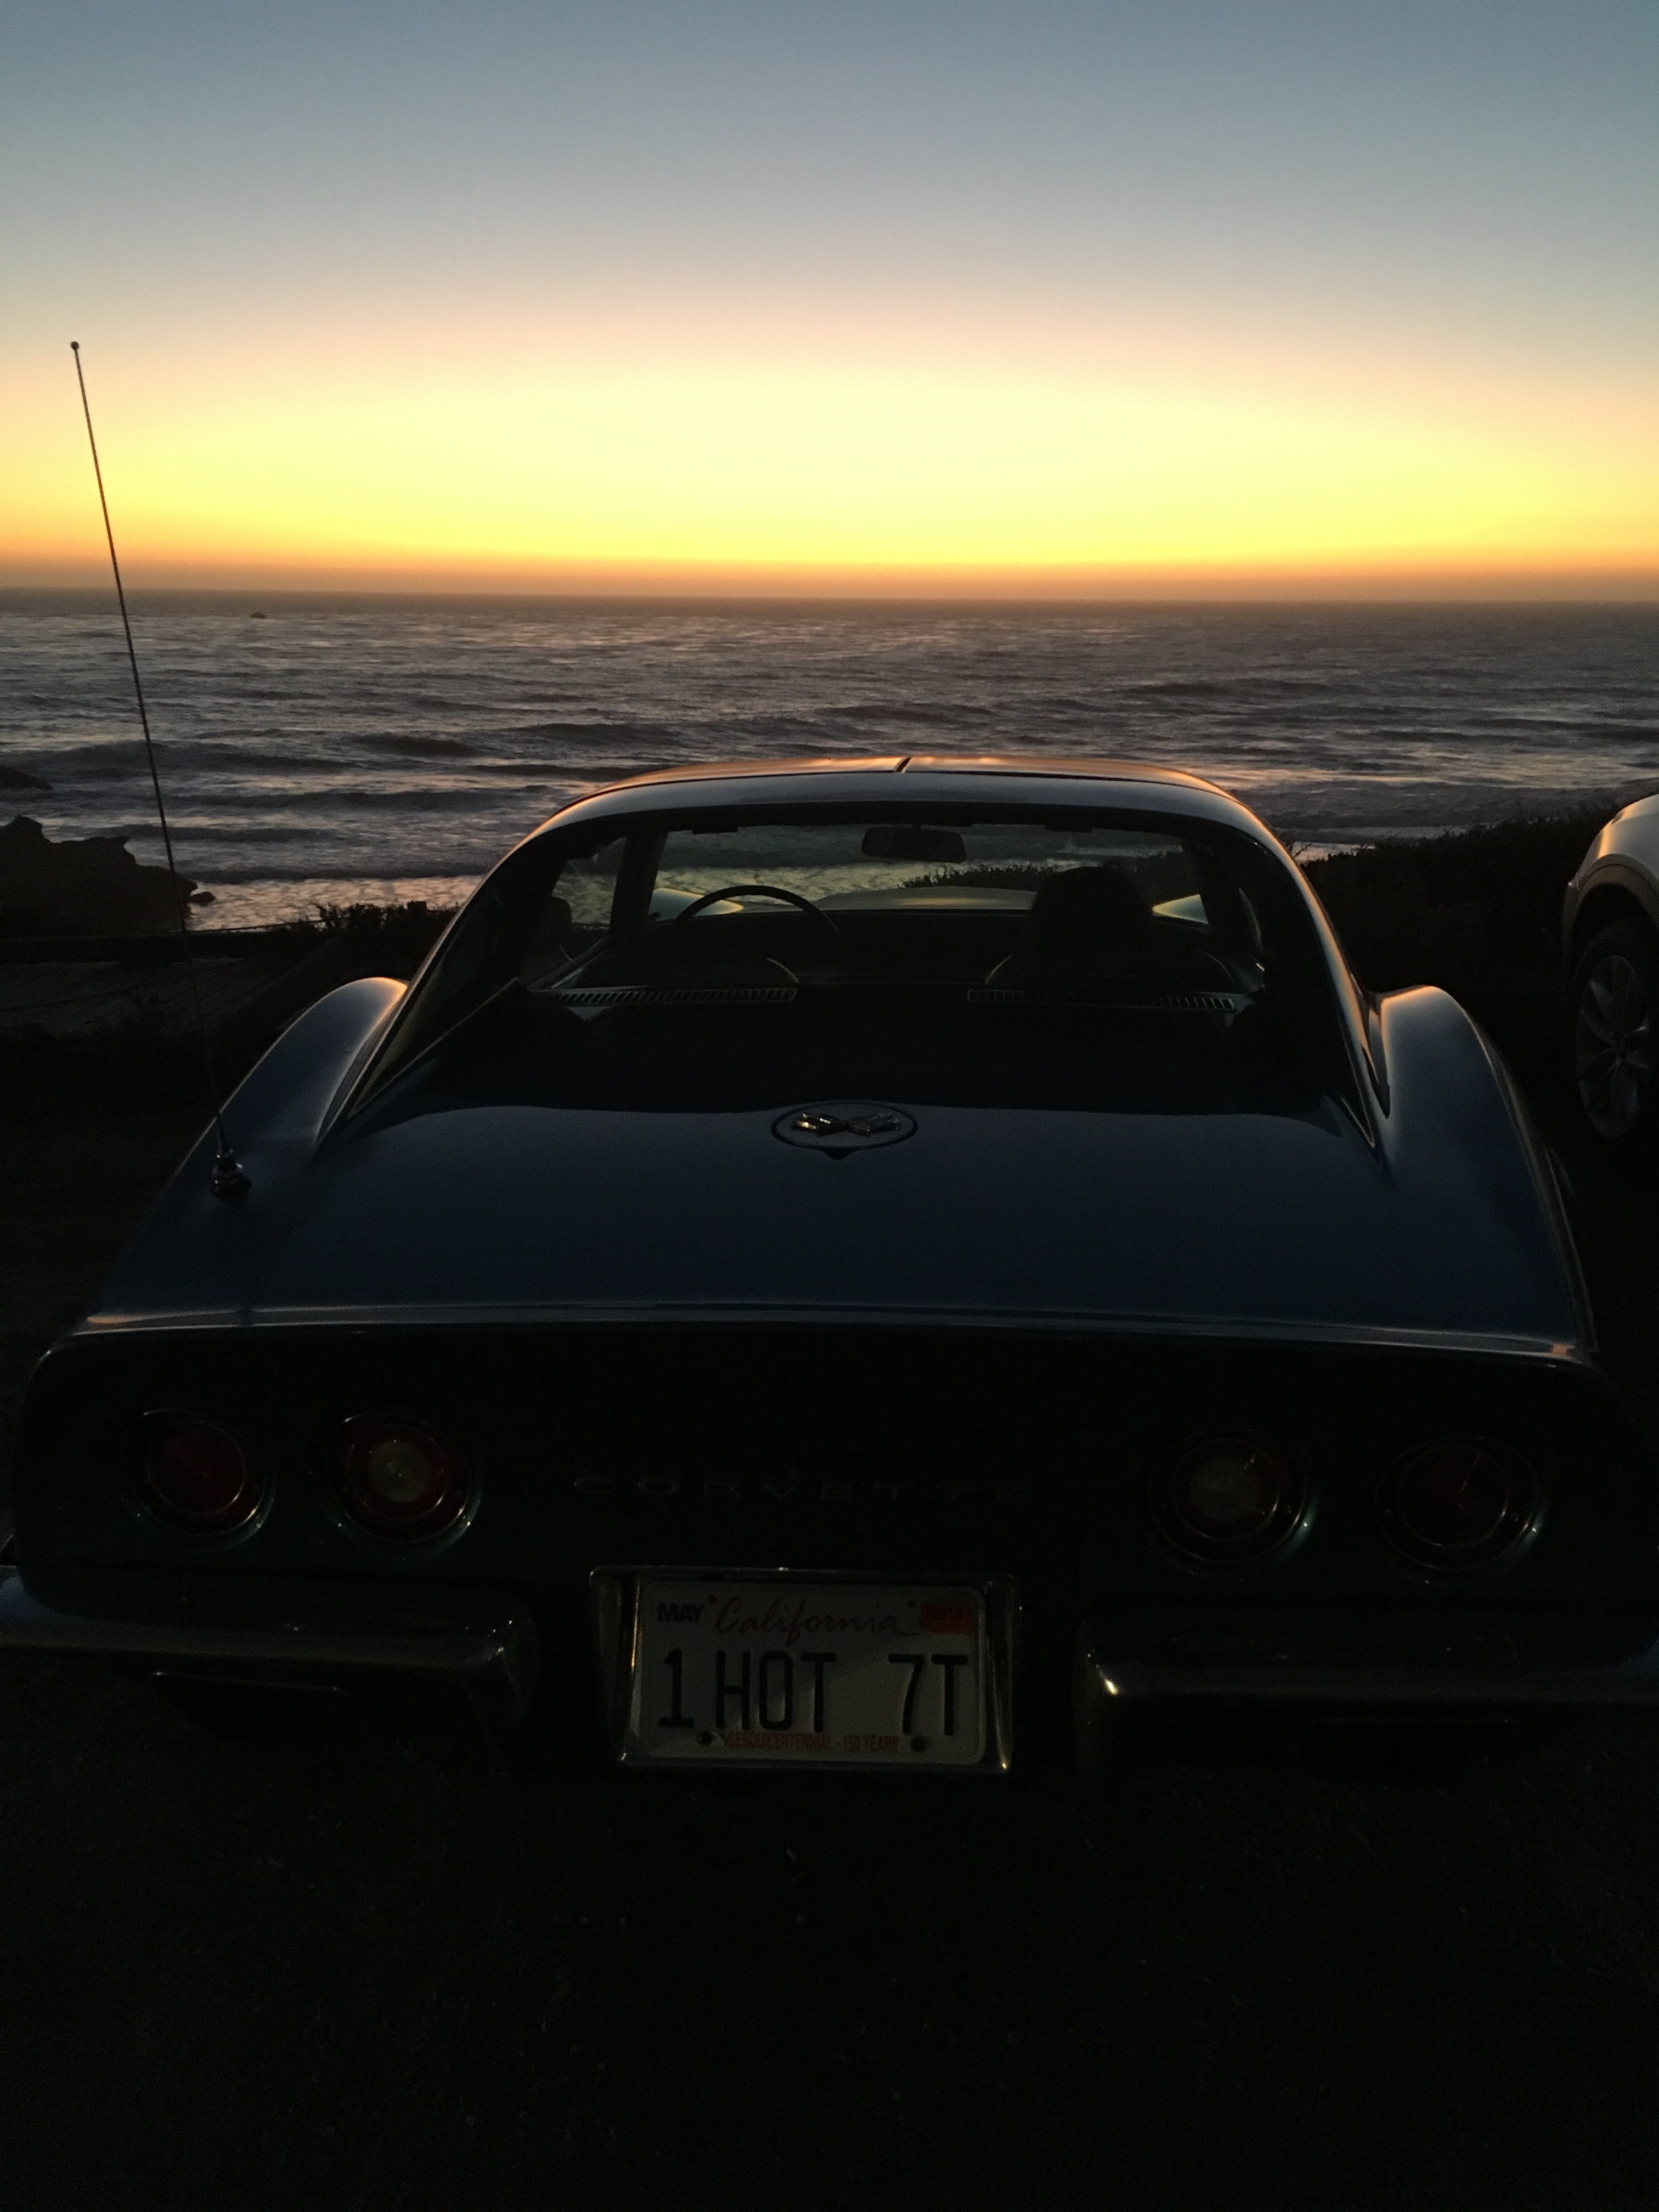 Ron Bartow's 1970 Corvette coupe at dusk at the beach in Cambria, CA.